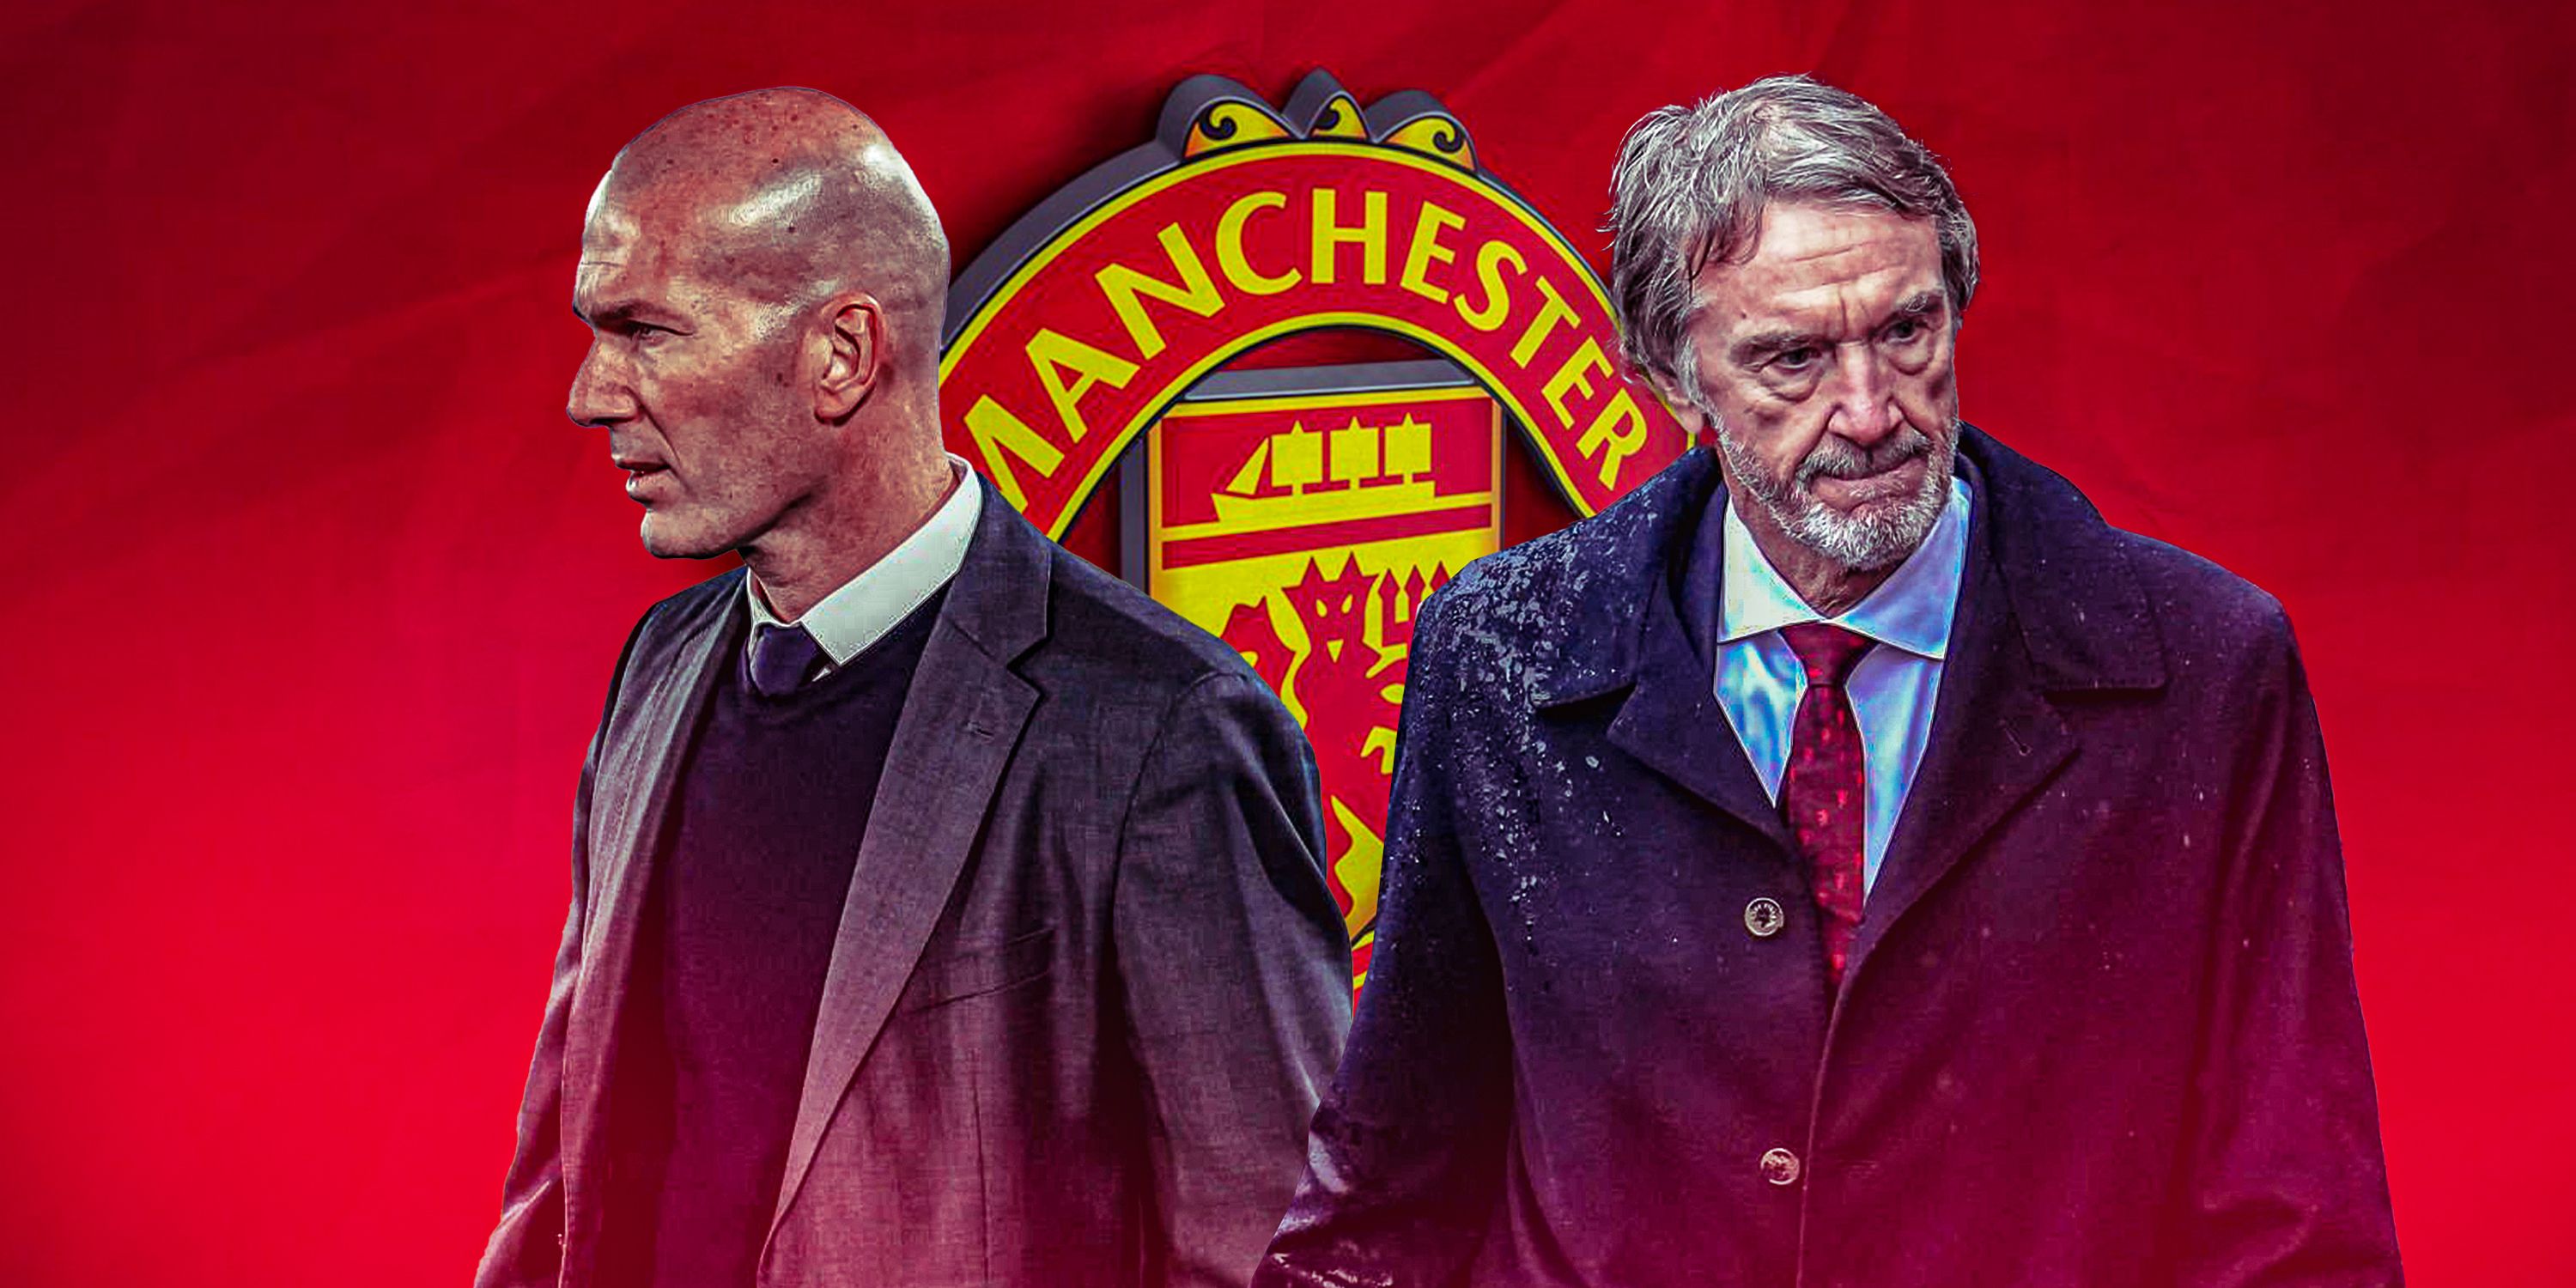 Manchester United co-owner Sir Jim Ratcliffe and Zinedine Zidane